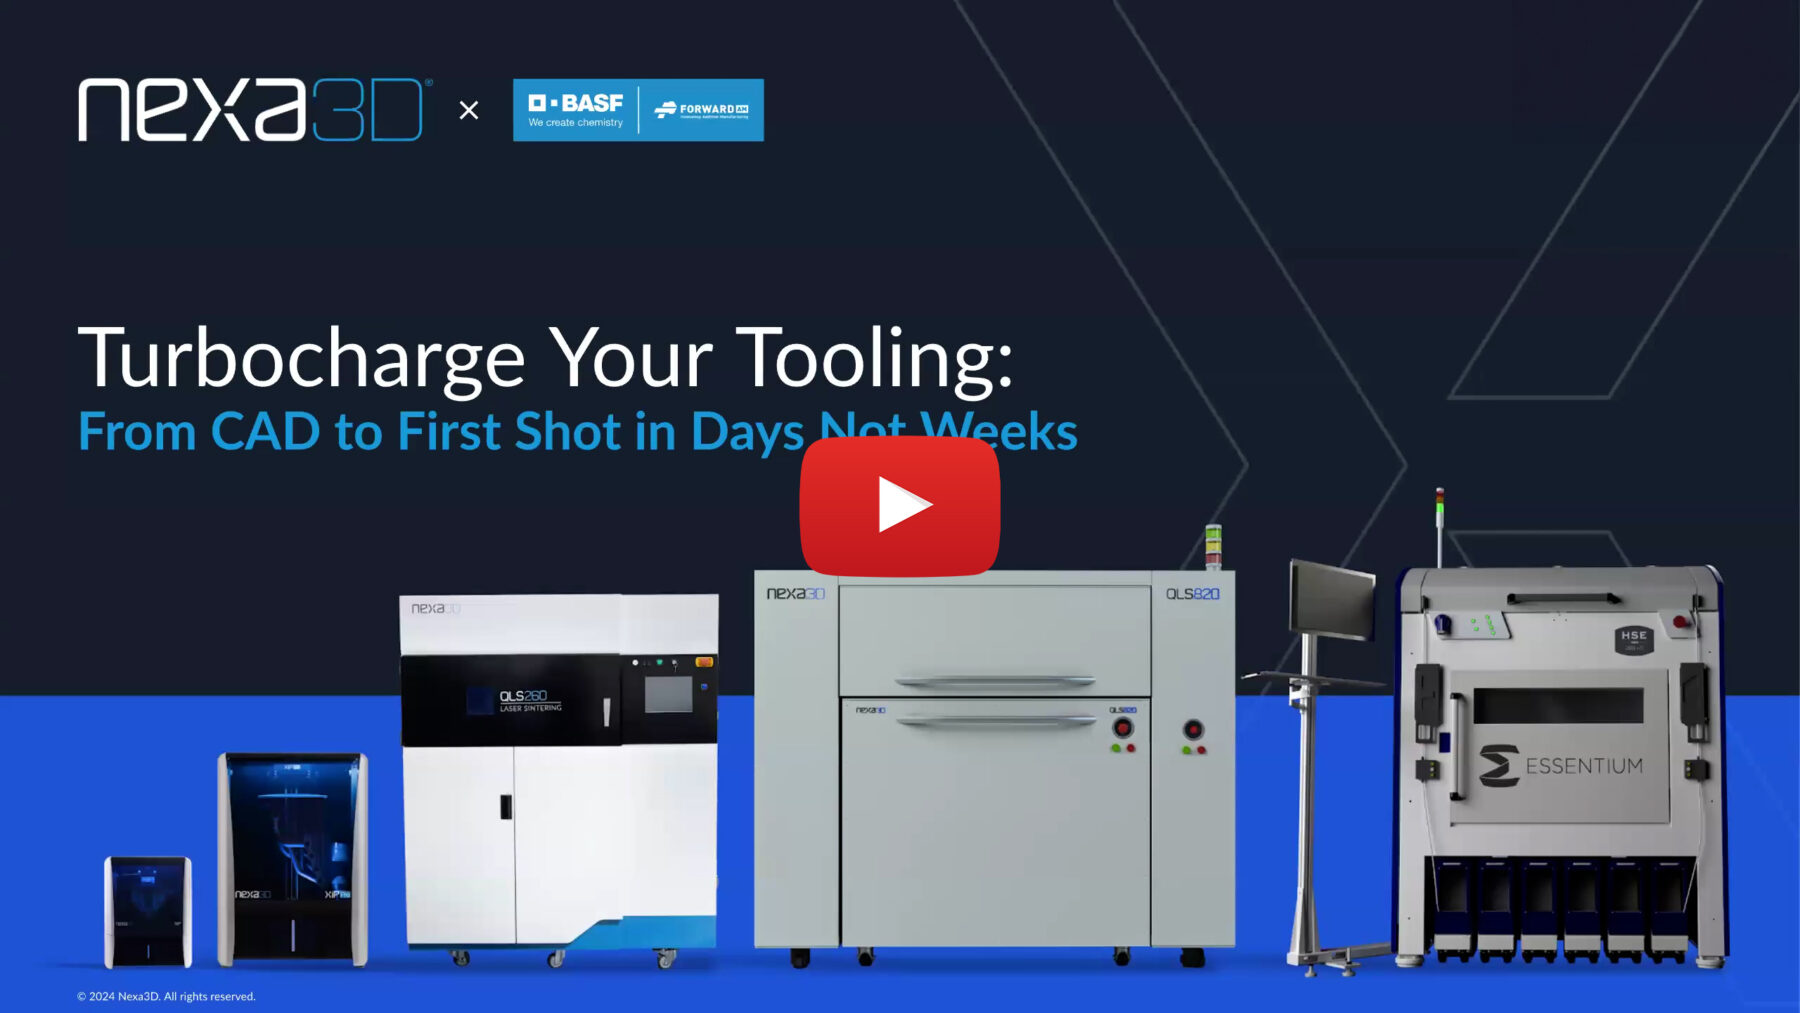 YOU'RE INVITED Turbocharge Your Tooling: From CAD to First Shot in Days Not Weeks